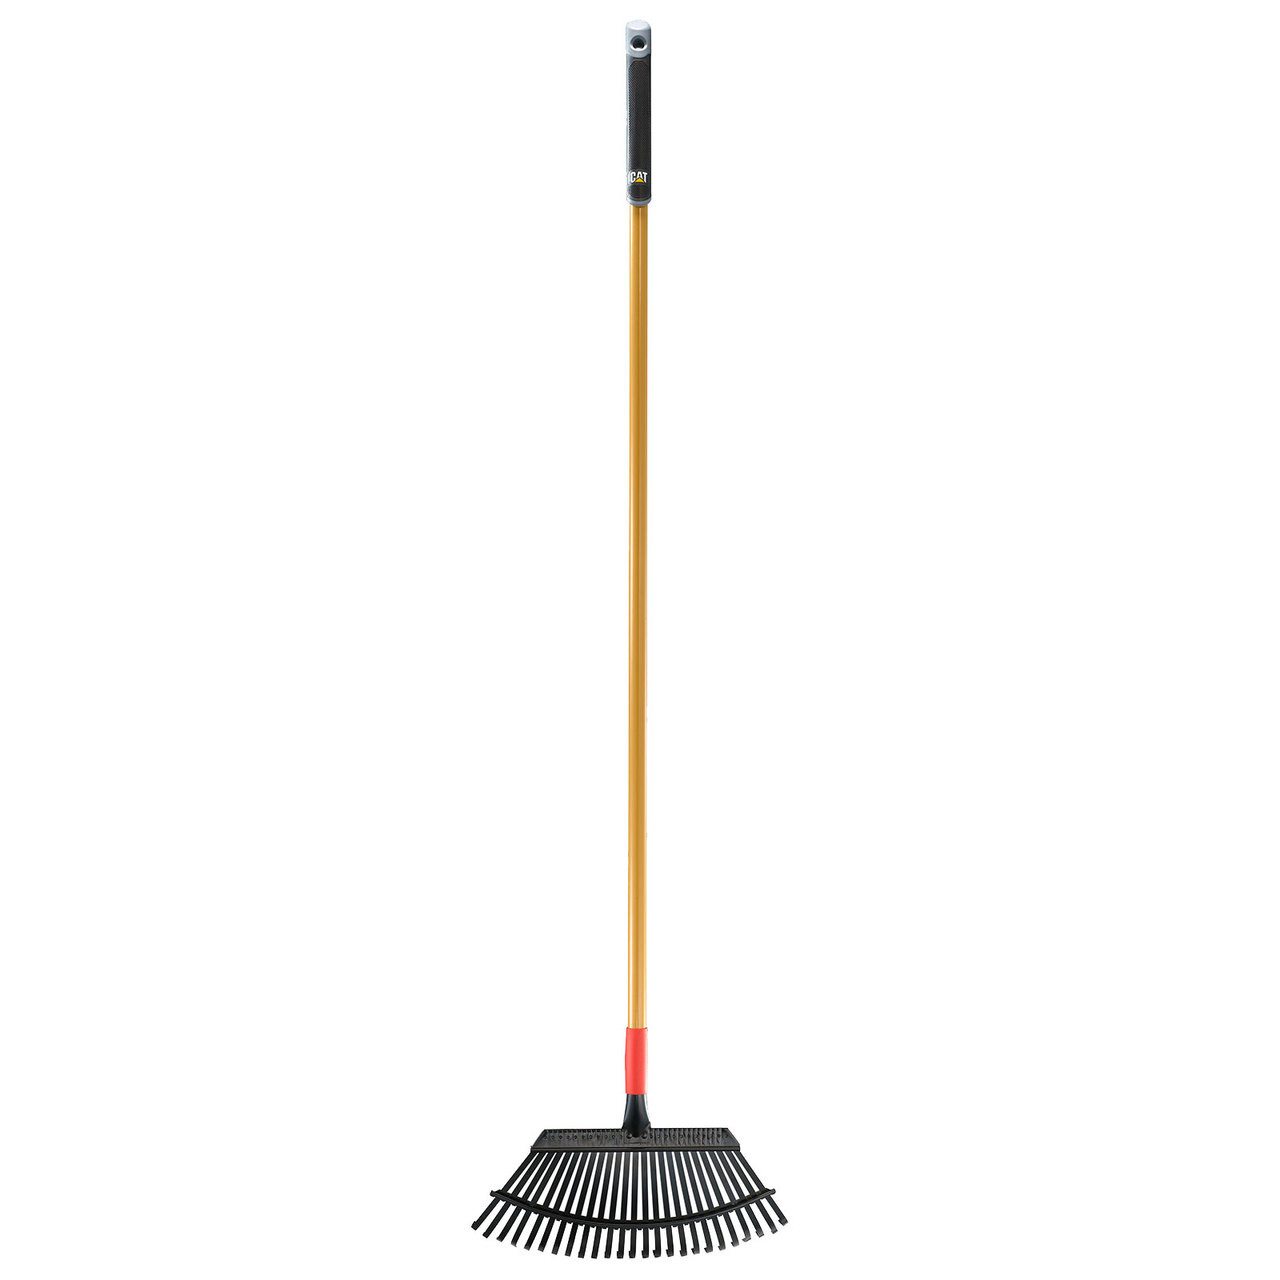 19" Lawn & Thatching Rake with Spring Steel Tines